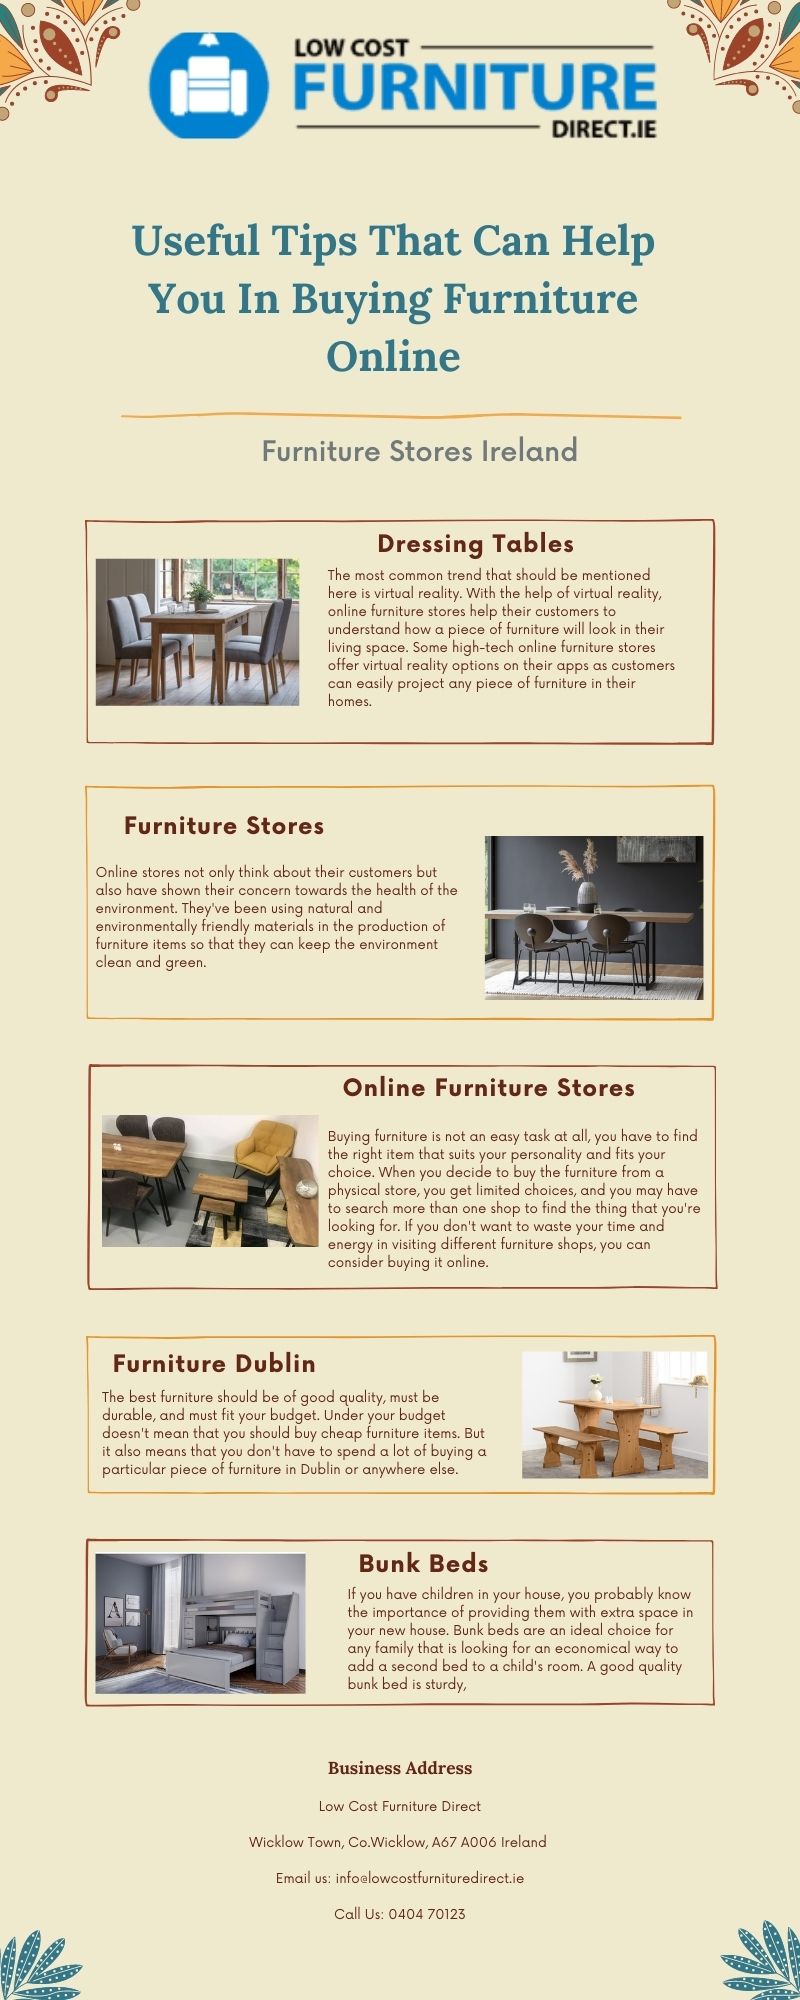 Useful Tips That Can Help You In Buying Furniture Online.jpg  by Lowcostfurnituredirect